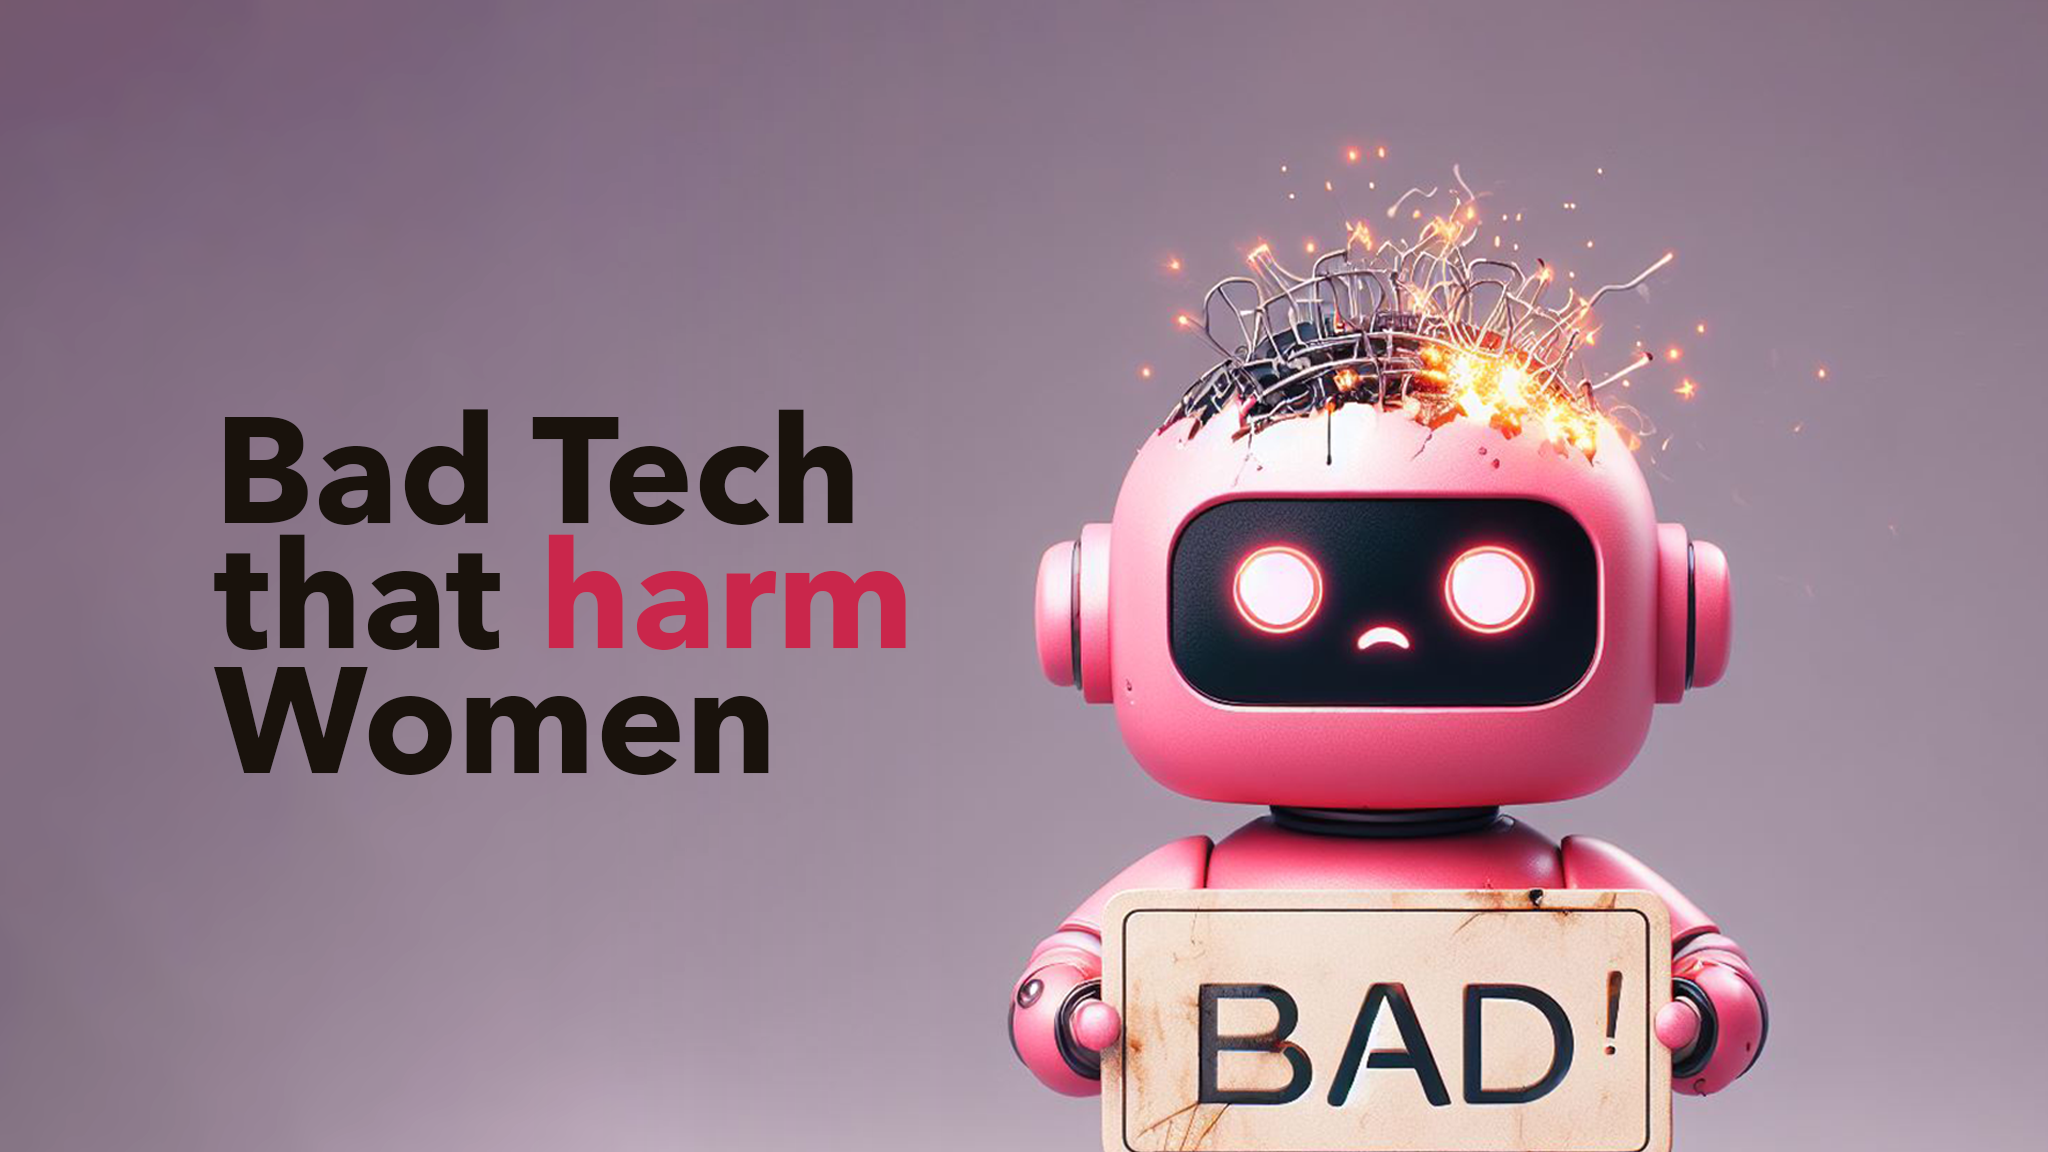 Protect Women in Tech - Take lesson from 3 worst cases ever